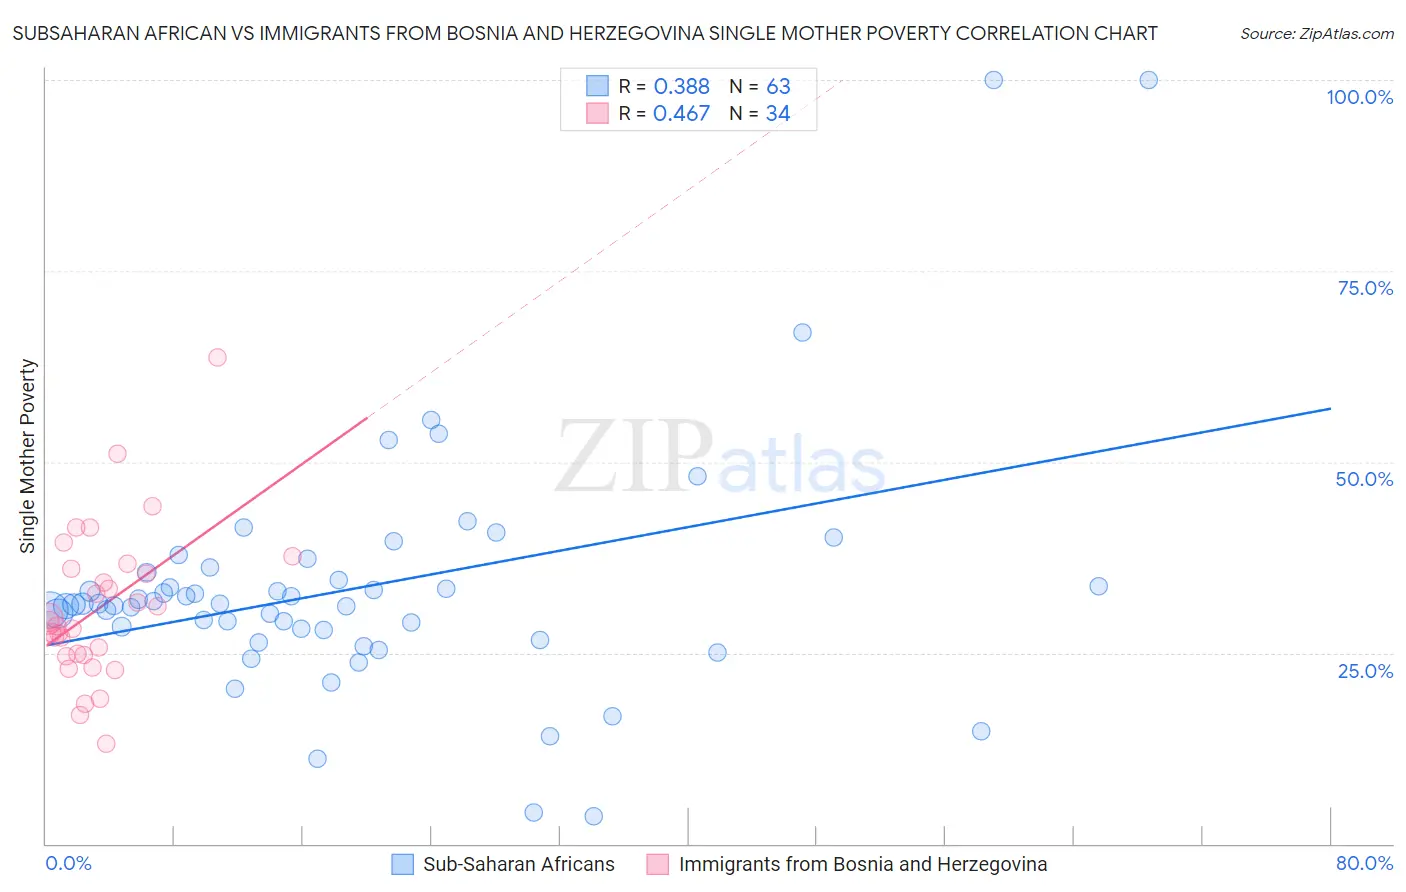 Subsaharan African vs Immigrants from Bosnia and Herzegovina Single Mother Poverty